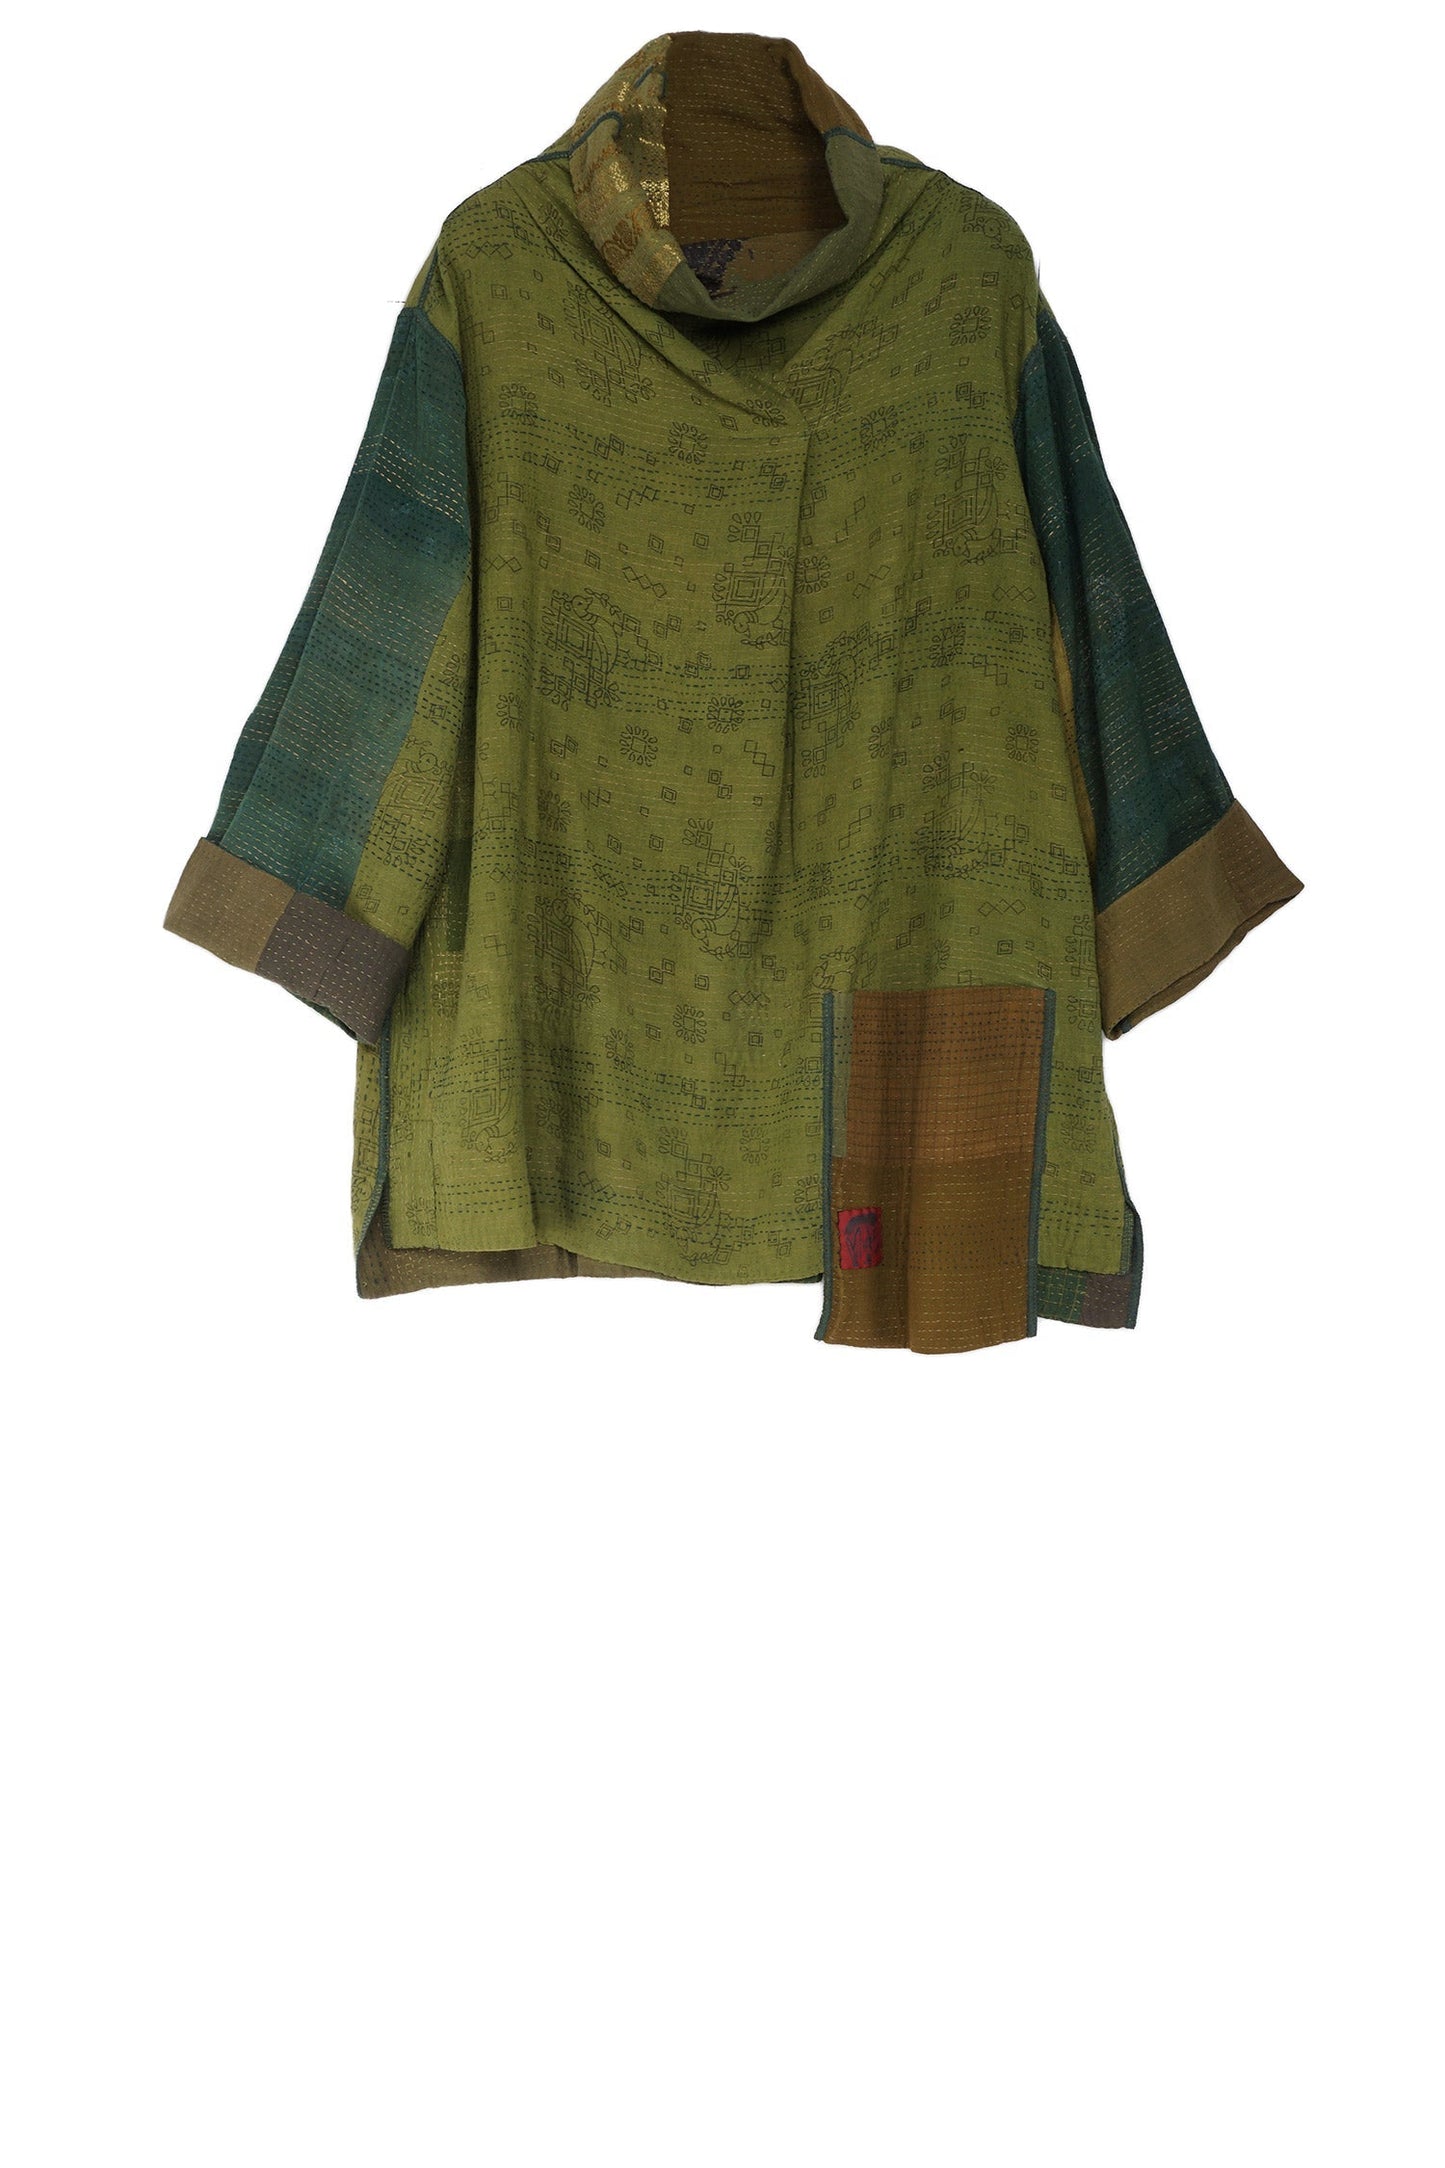 BROCADE PATCHED KANTHA STAND COLLAR TUNIC - bp2509-lim -